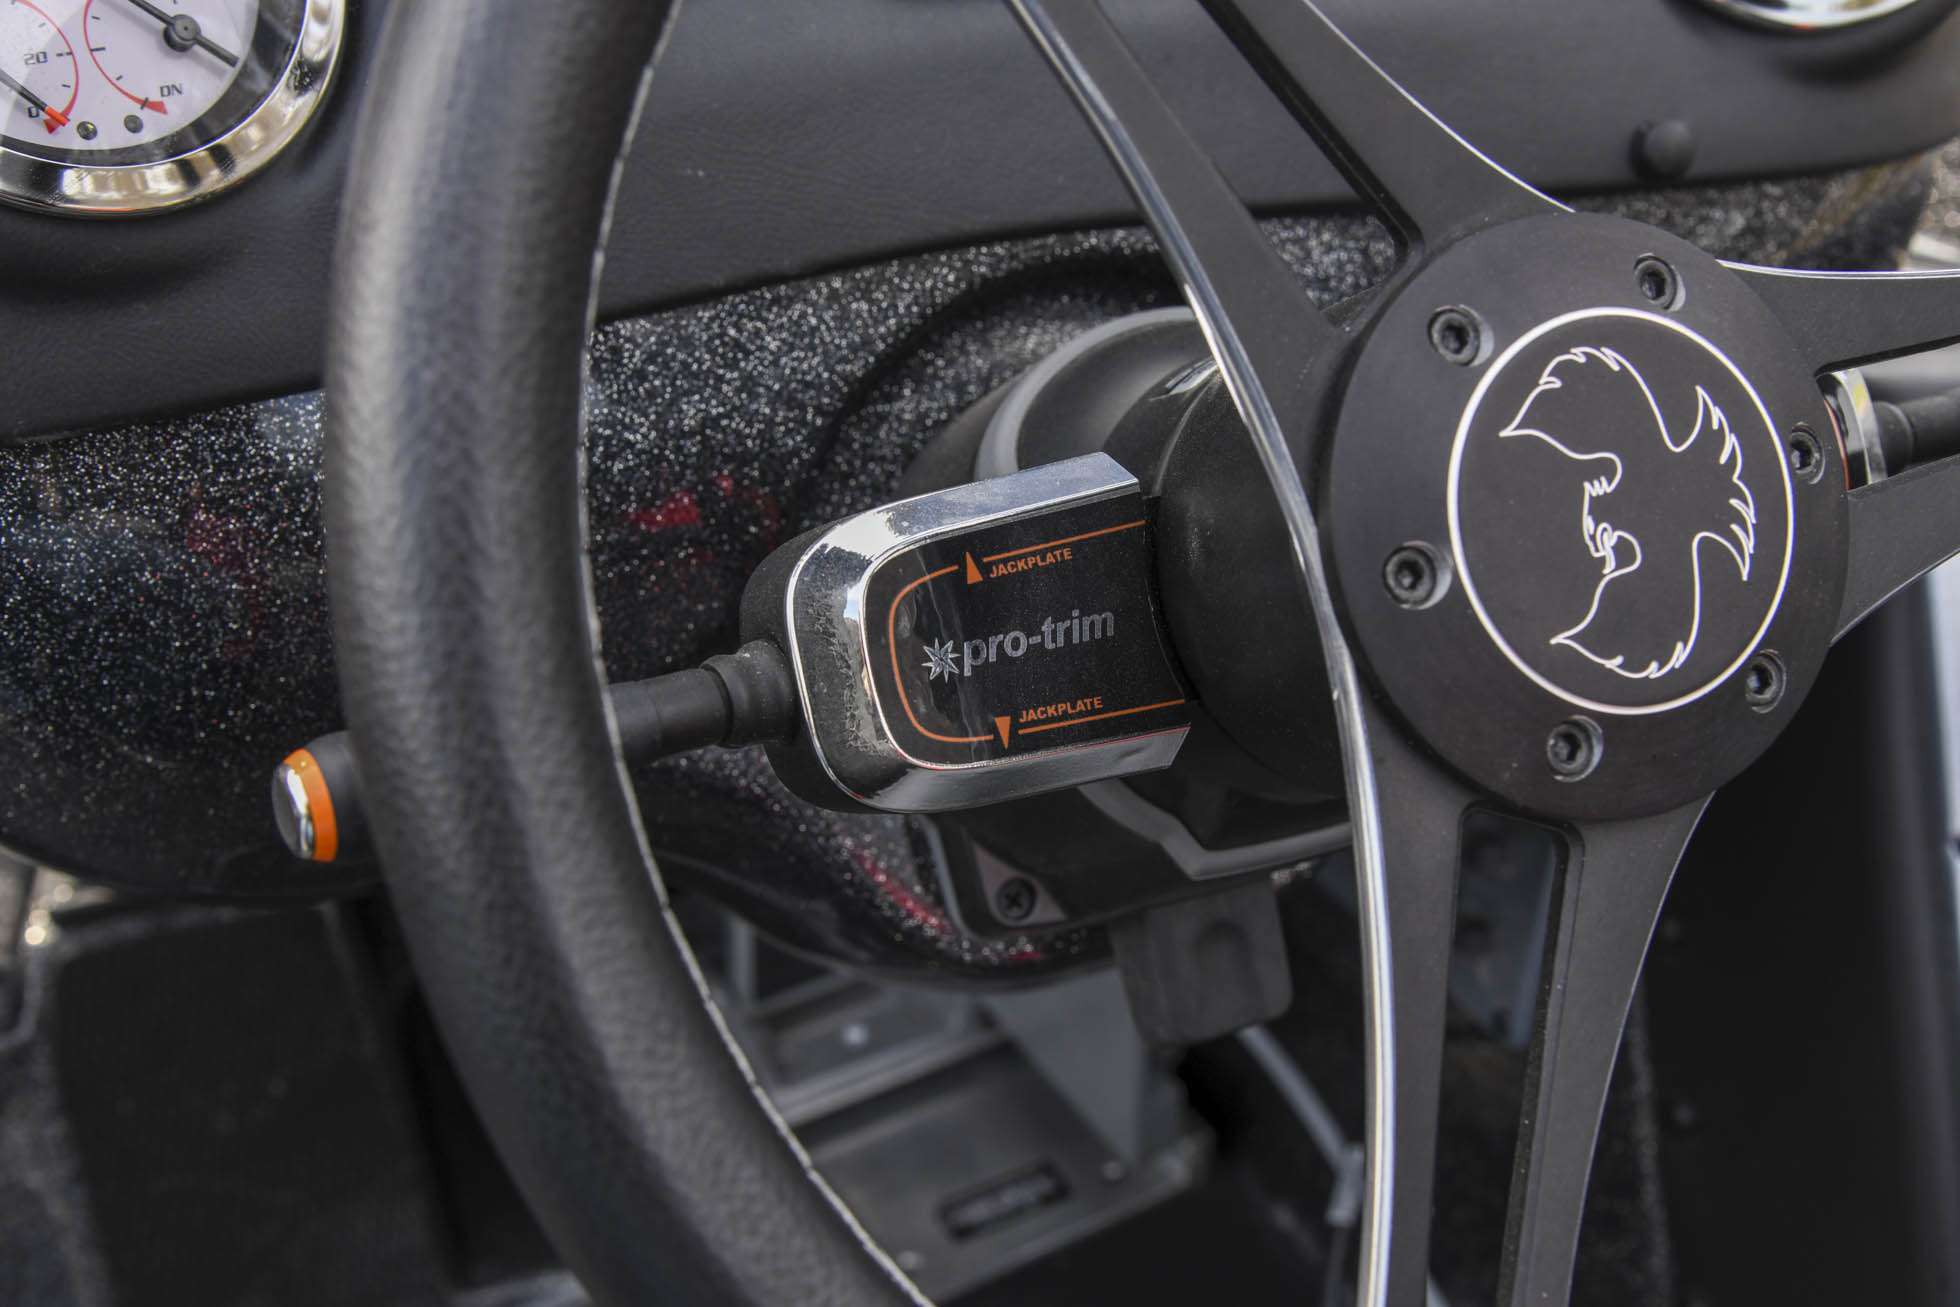  A Pro-trim switch on the left side of the steering column operates Mullinsâ T-H Marine Atlas jack plate.